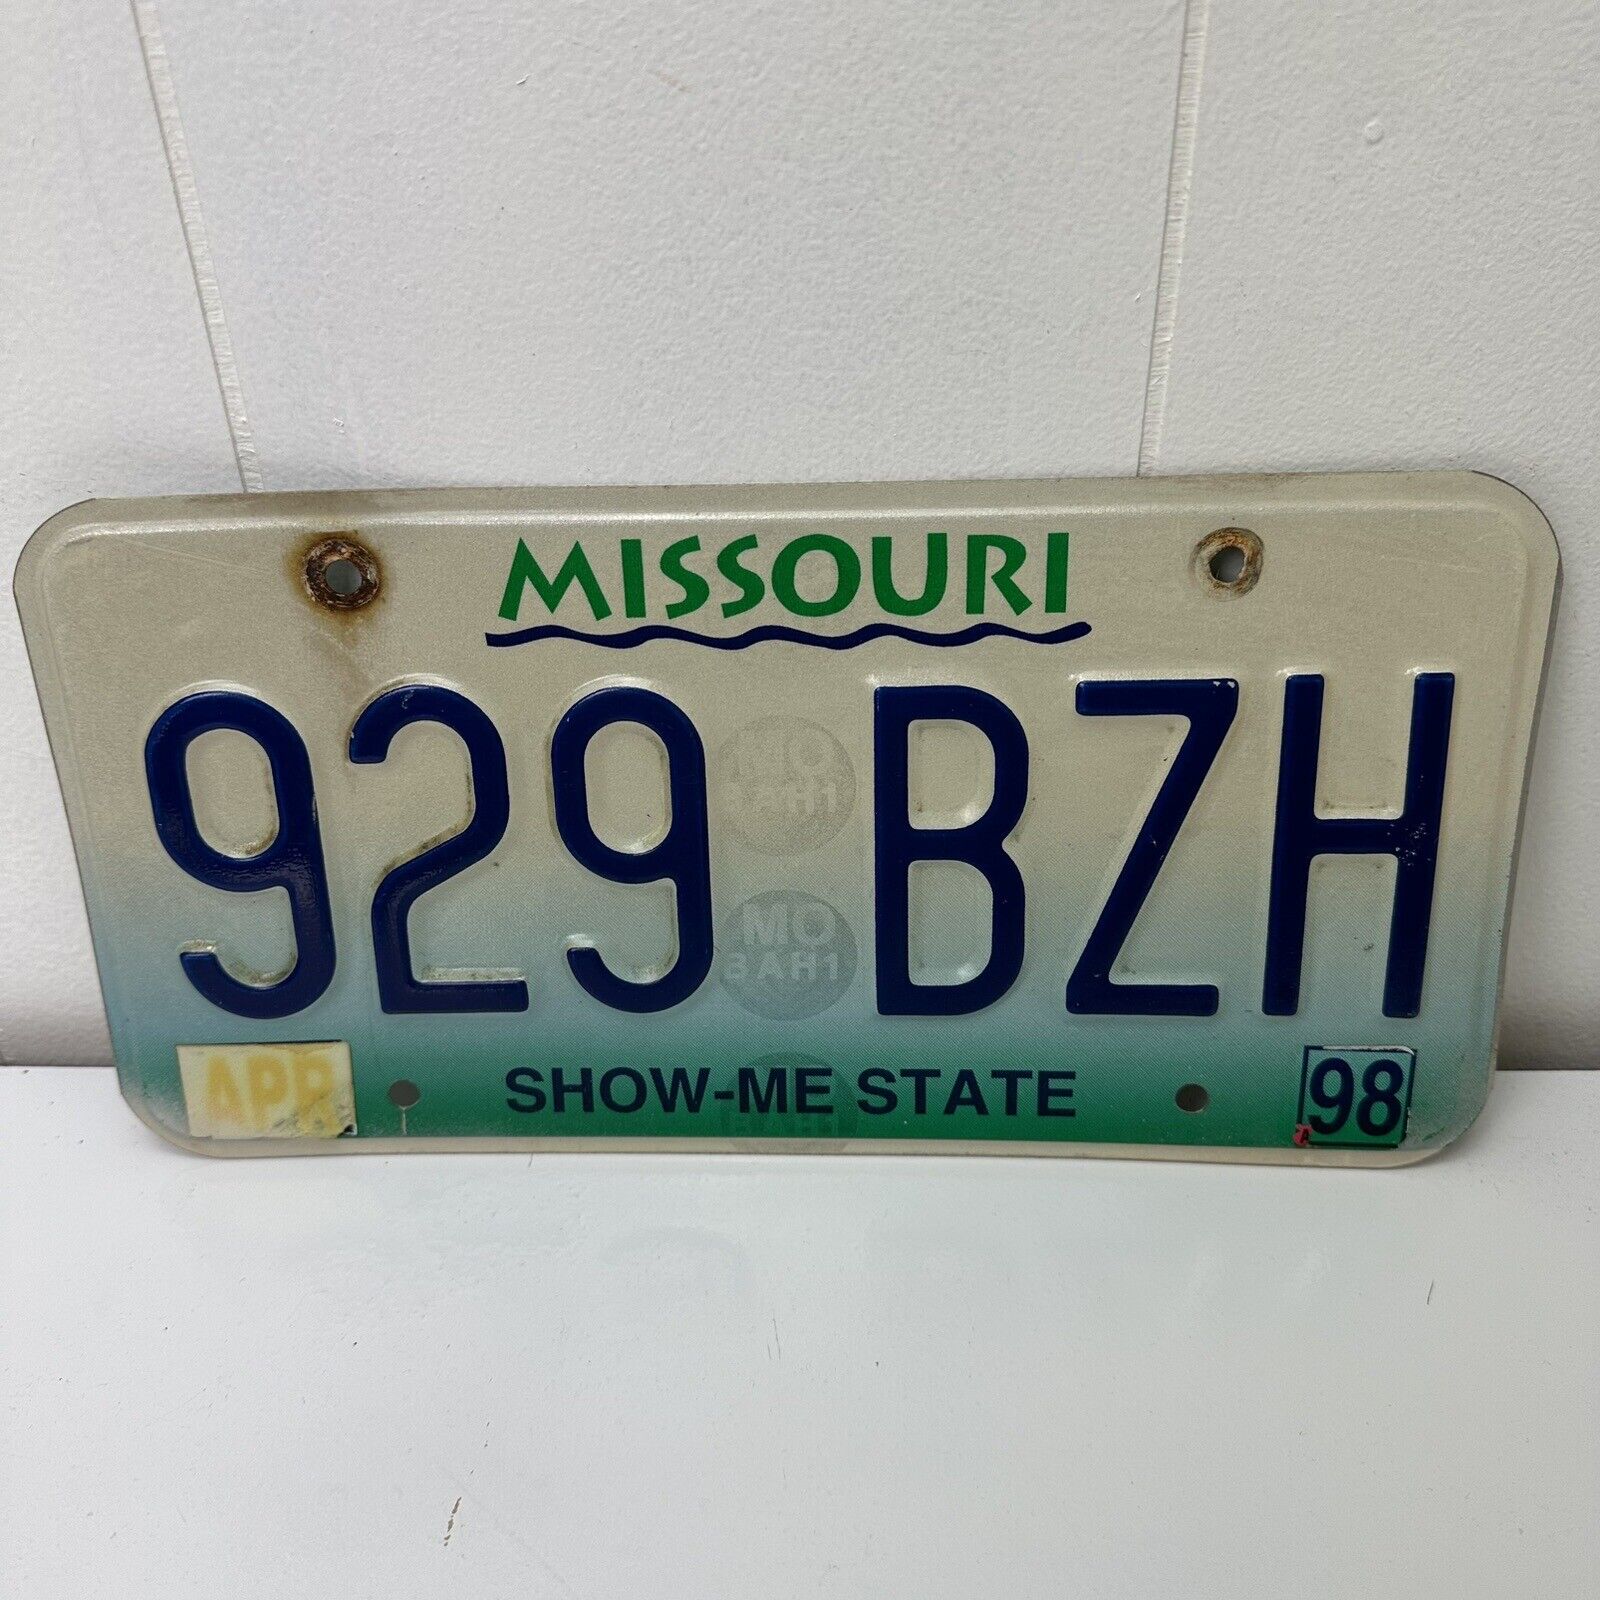 Vintage MISSOURI License Plate 929 BZH Show Me State 1998 90s